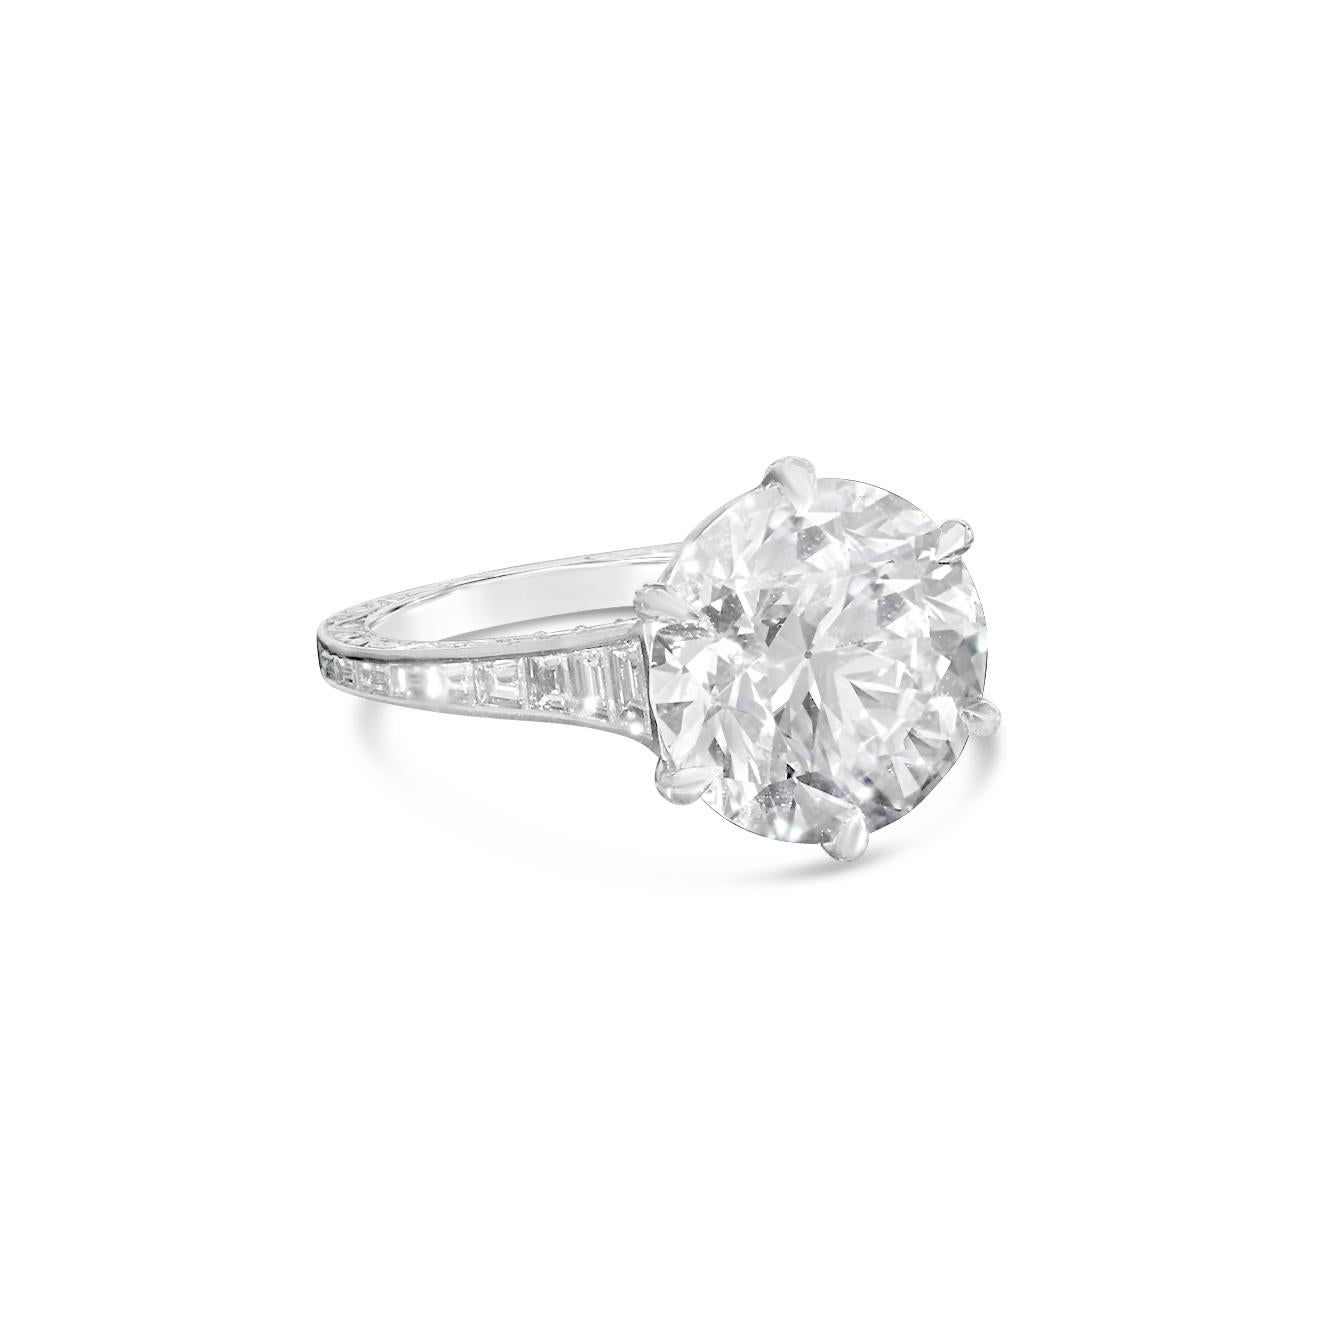 5.07ct G SI1 old European brilliant cut diamond with GIA certificate
Calibre-cut diamonds weighing a combined total of 0.87cts
Platinum with maker's signature
UK finger size K, US size 5.5 - can be ordered in your own finger size
5.2 grams

A